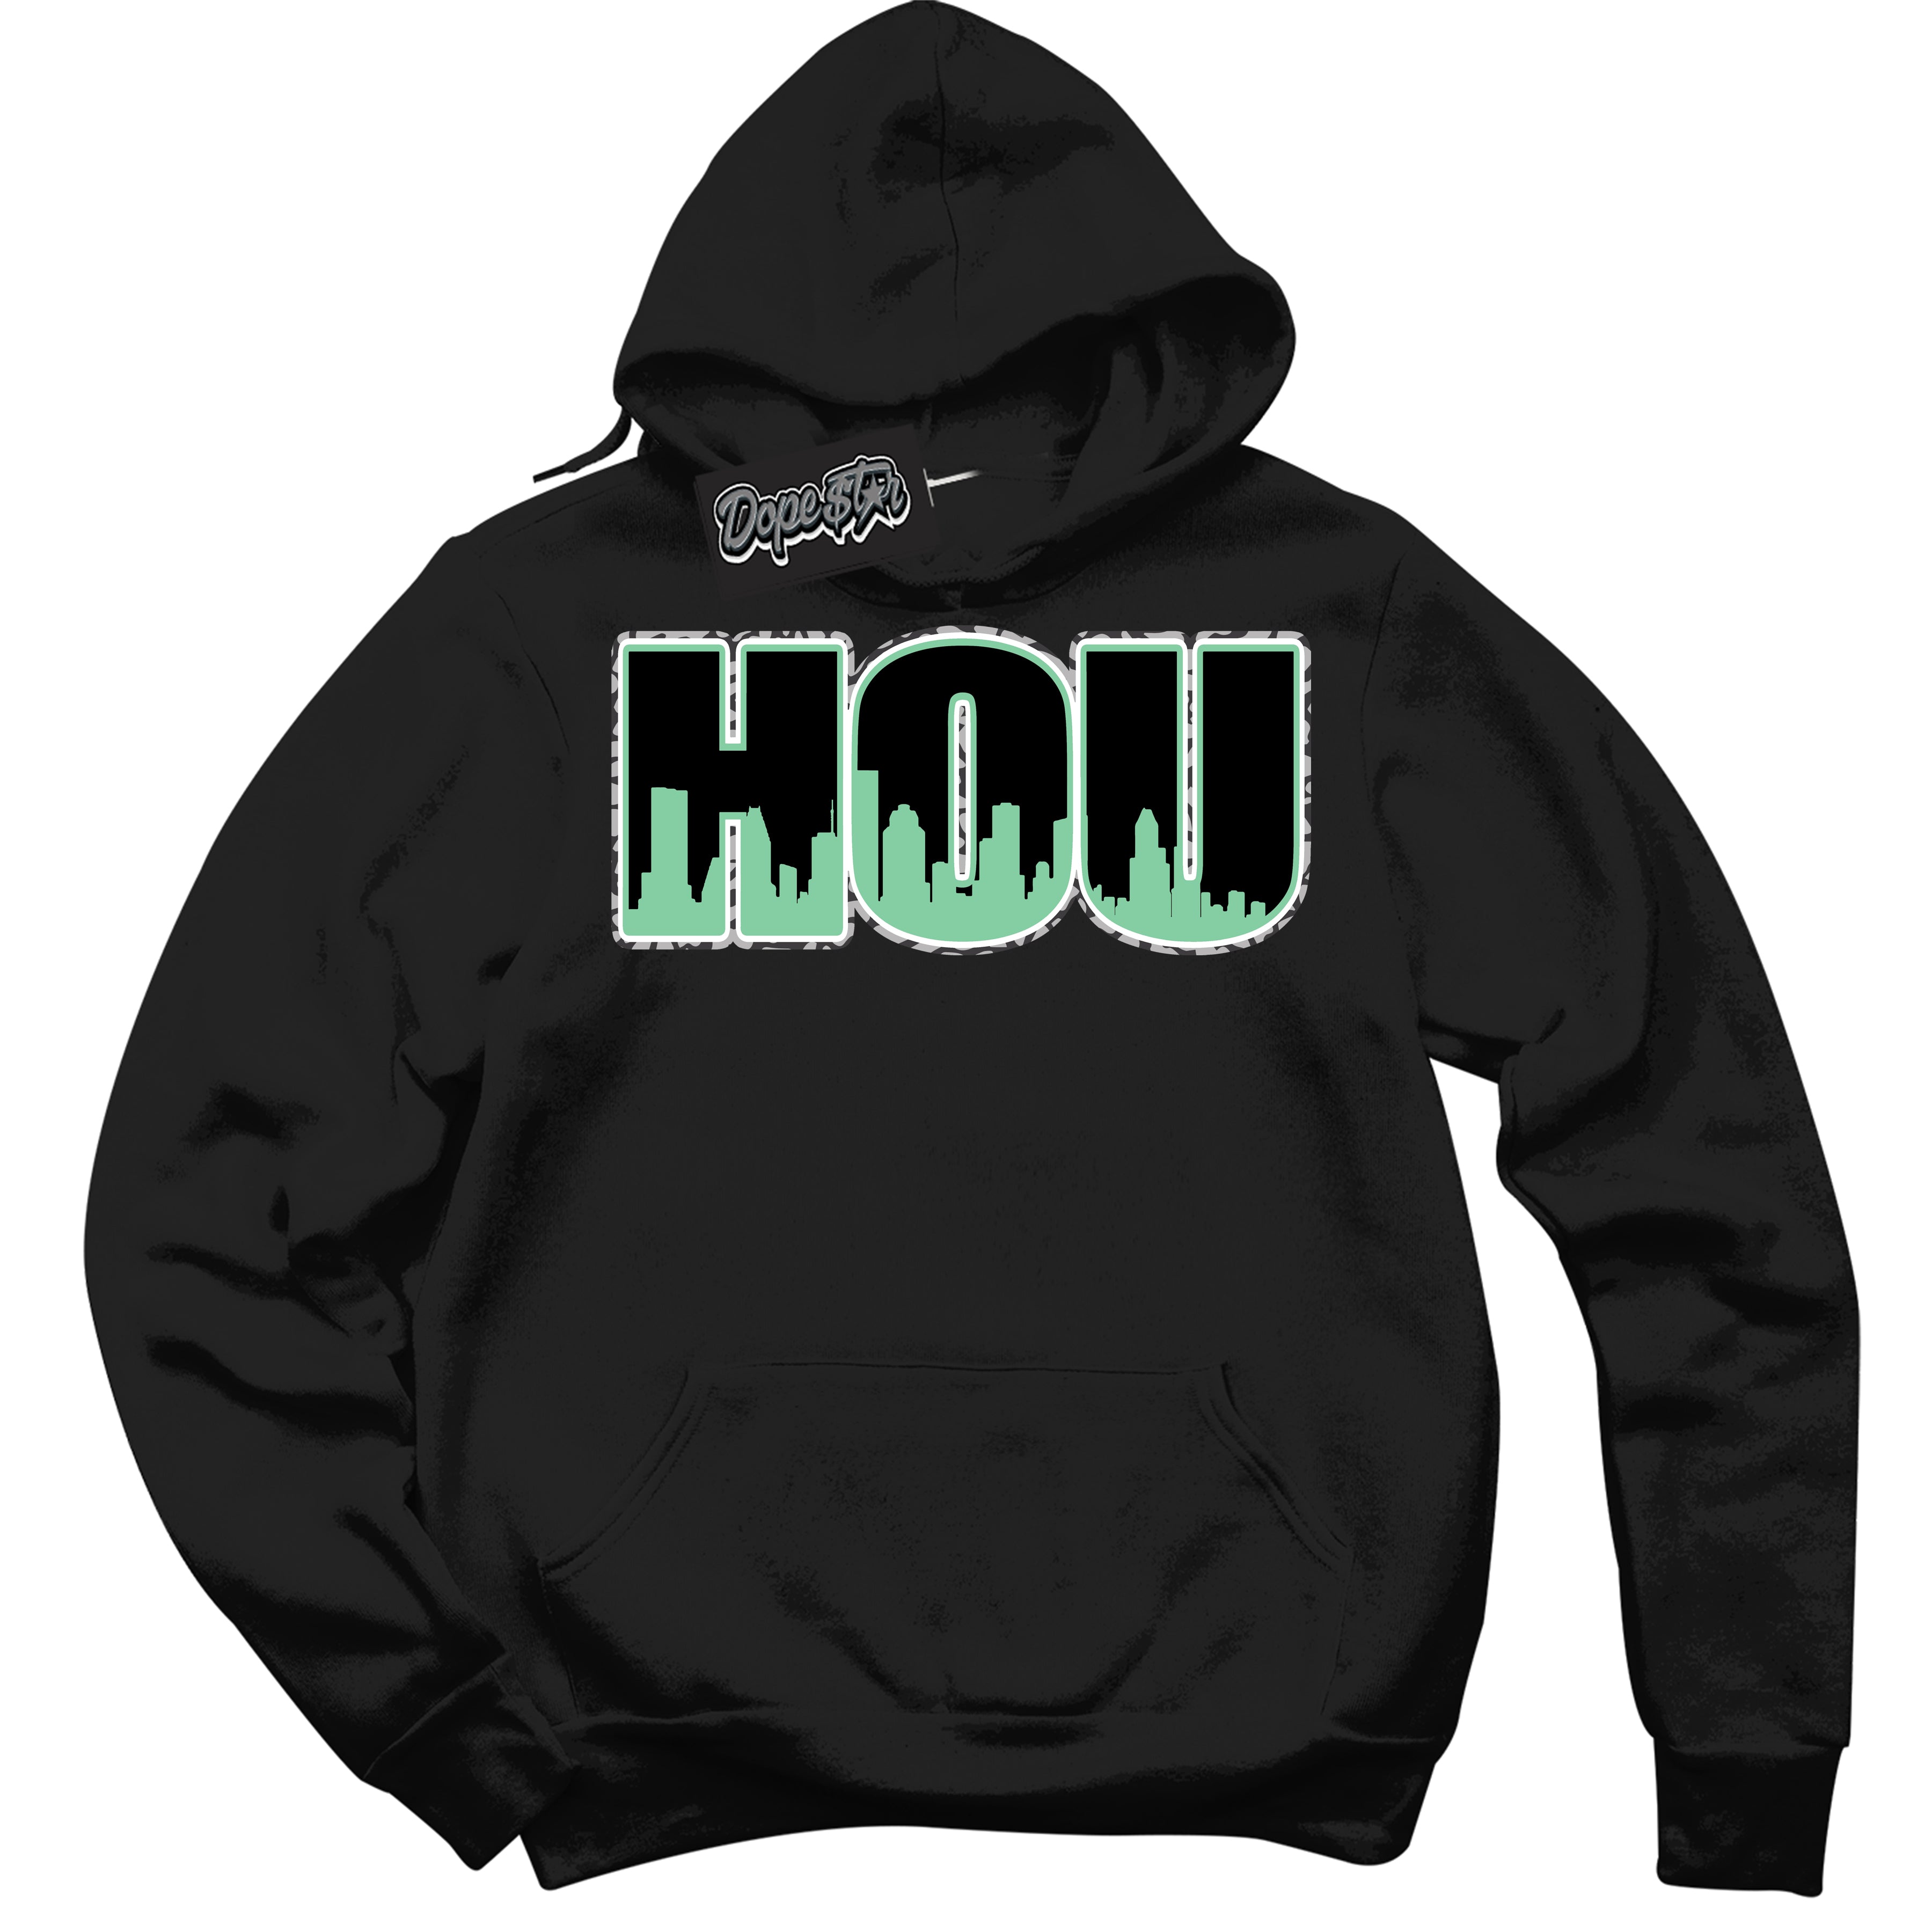 Cool Black Graphic DopeStar Hoodie with “ Houston “ print, that perfectly matches Green Glow 3S sneakers